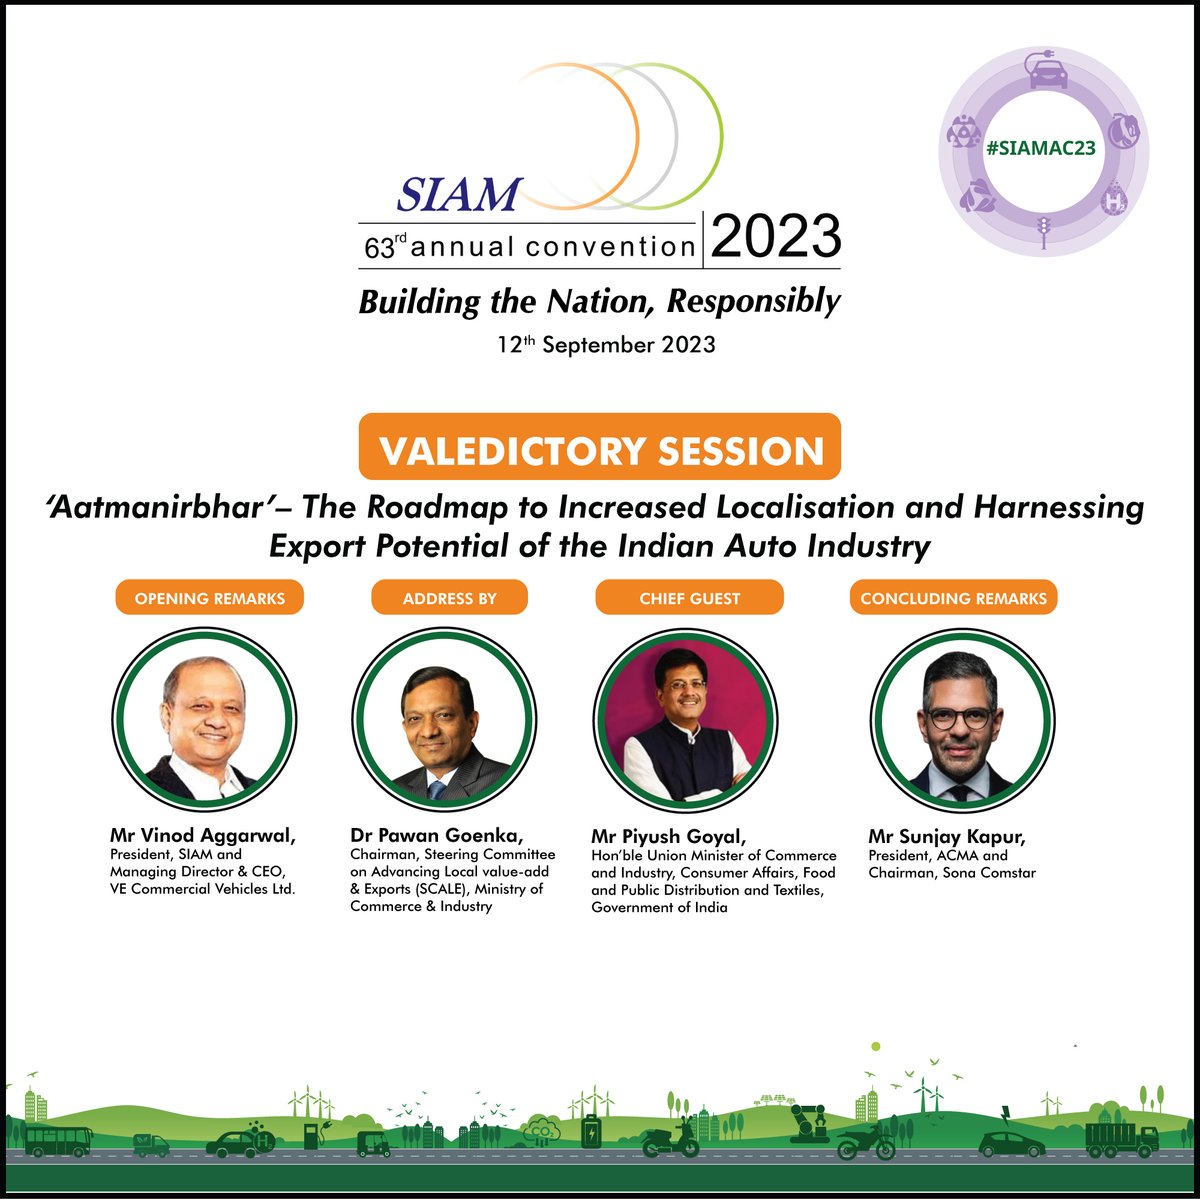 At the Valedictory Session of SIAM Annual Convention 2023, our esteemed Chief Guest, Mr. Piyush Goyal, Hon’ble Union Minister of Commerce and Industry, Consumer Affairs, Food and Public Distribution and Textiles, will be joined by leading luminaries from the industry to…